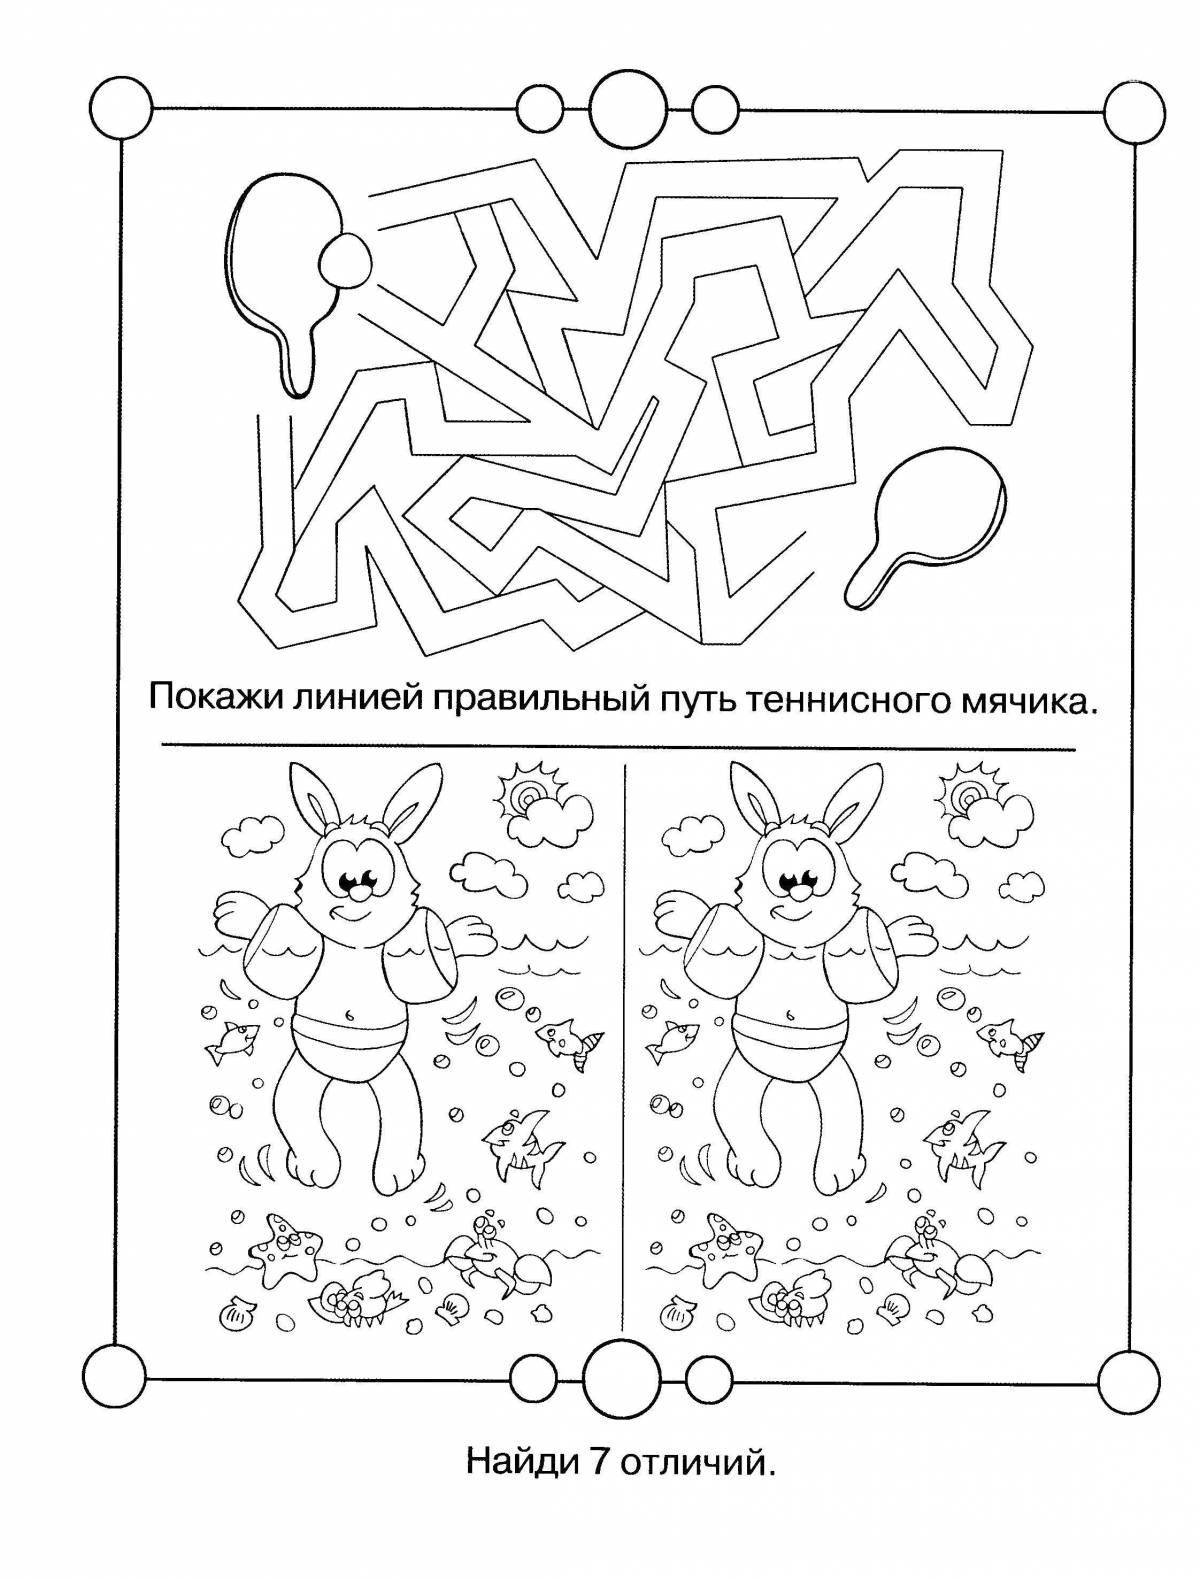 Interesting coloring puzzles for children 7-8 years old